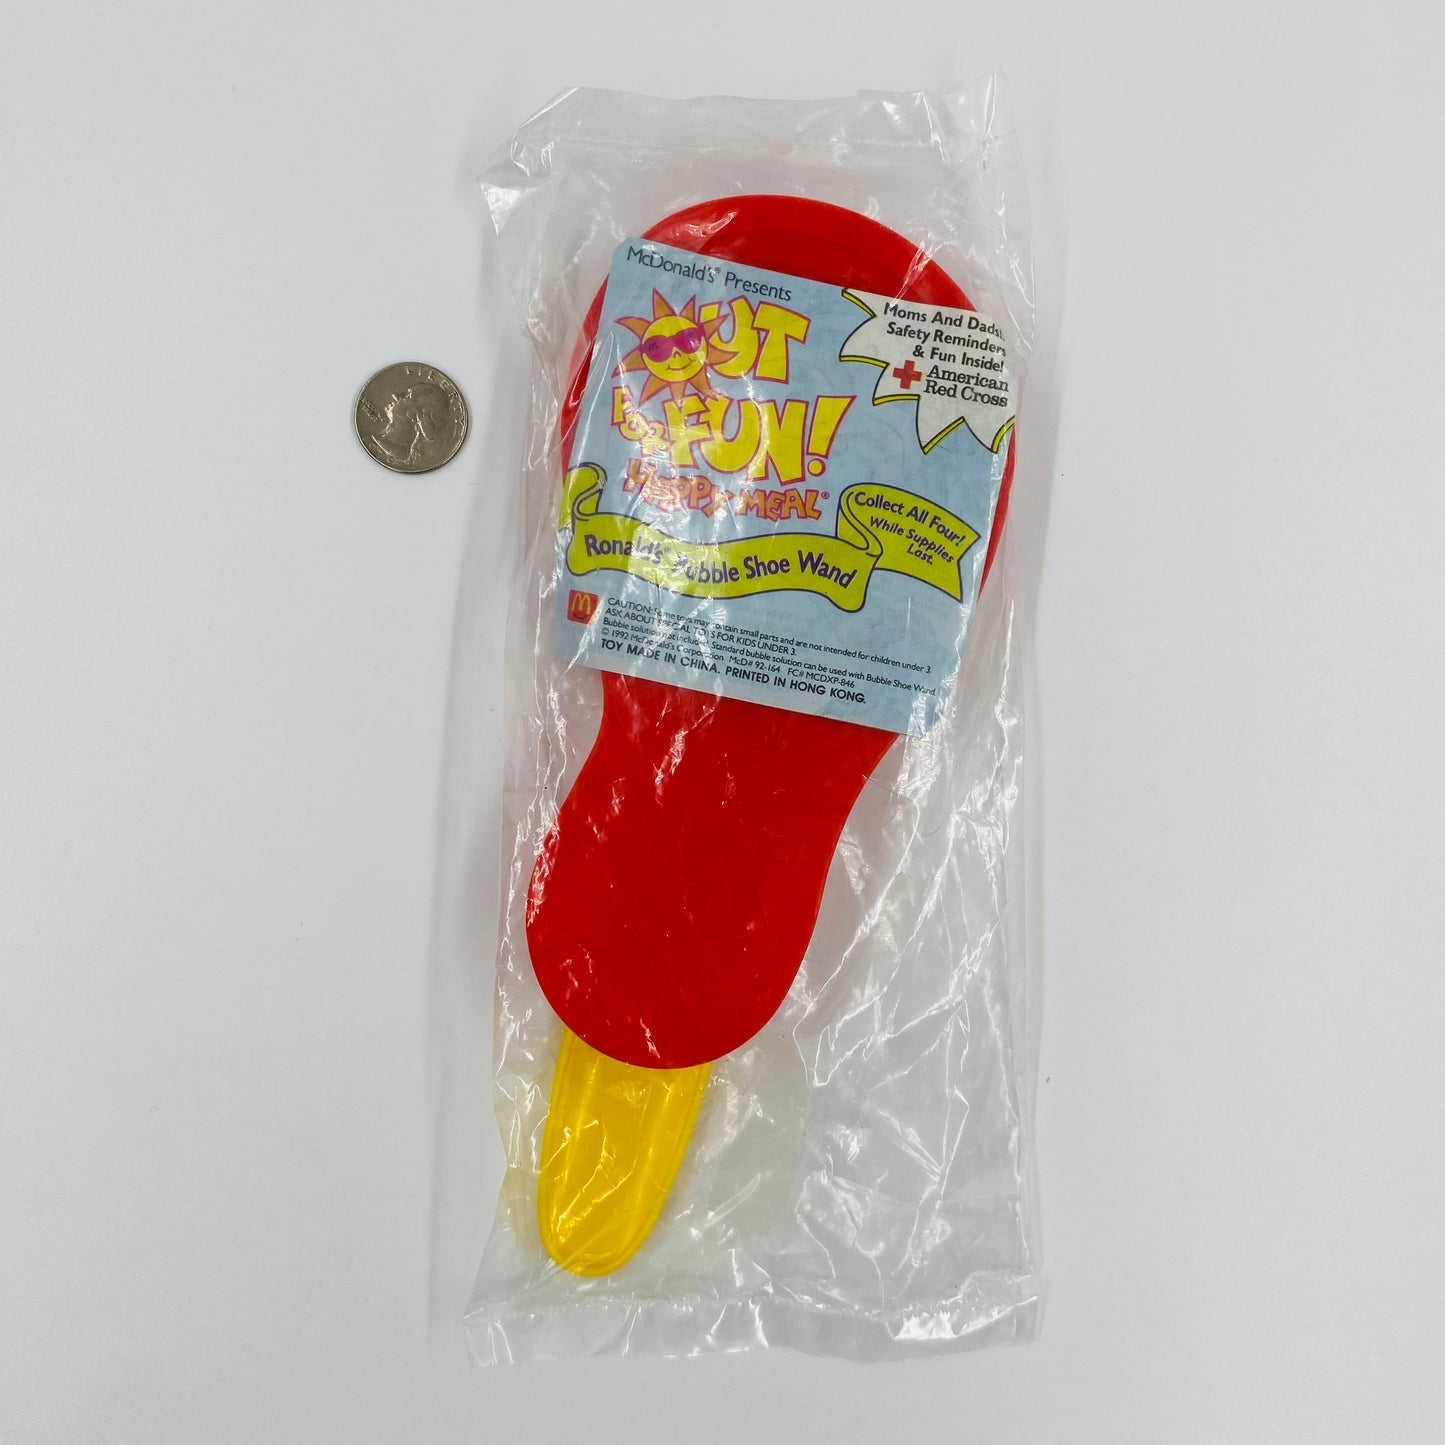 McDonald's Presents Out For Fun! Ronald's Bubble Shoe Wand McDonald's Happy Meal toy (1992) bagged